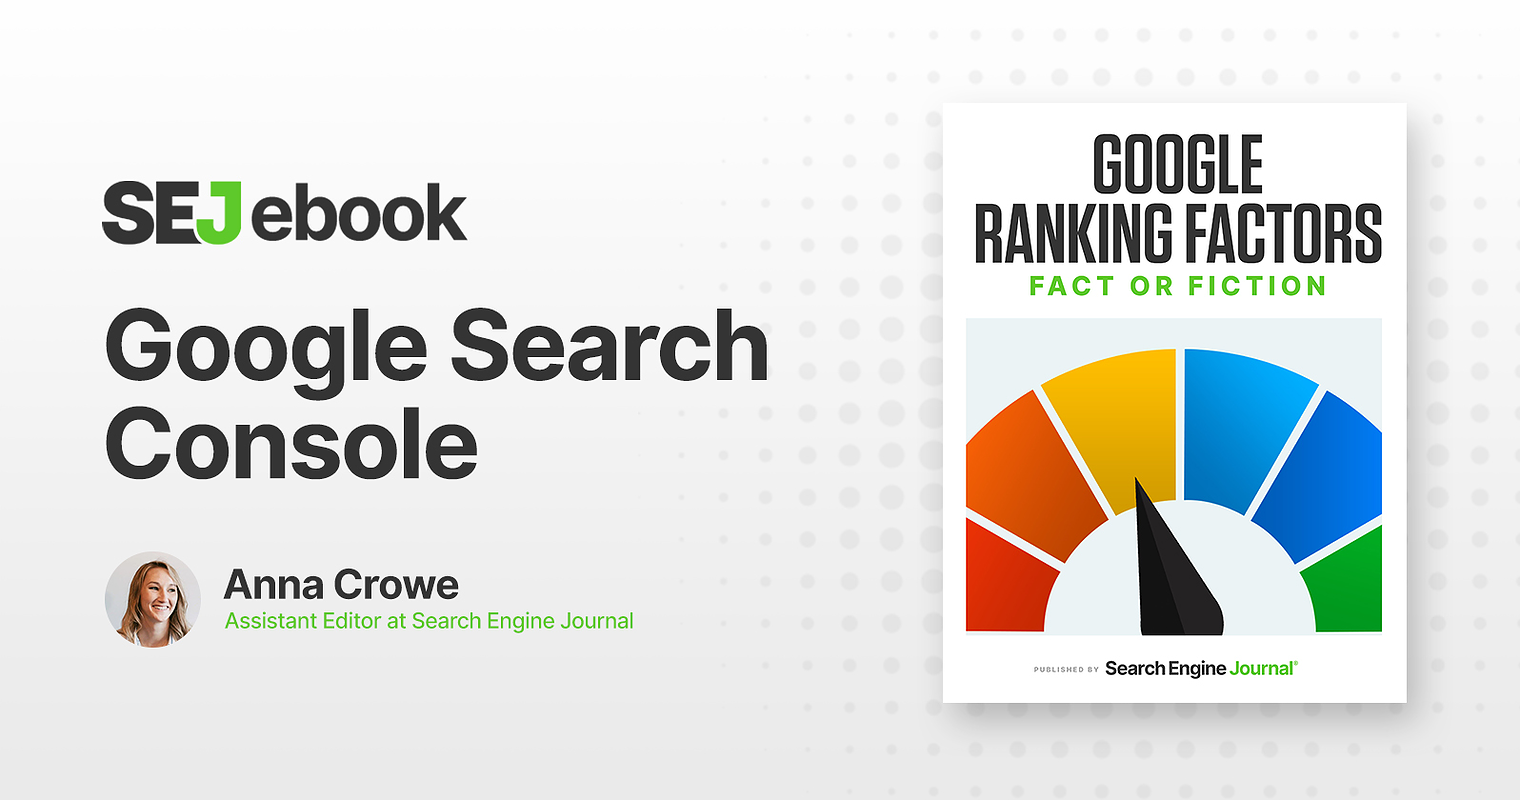 Google Search Console: Is It a Ranking Factor?